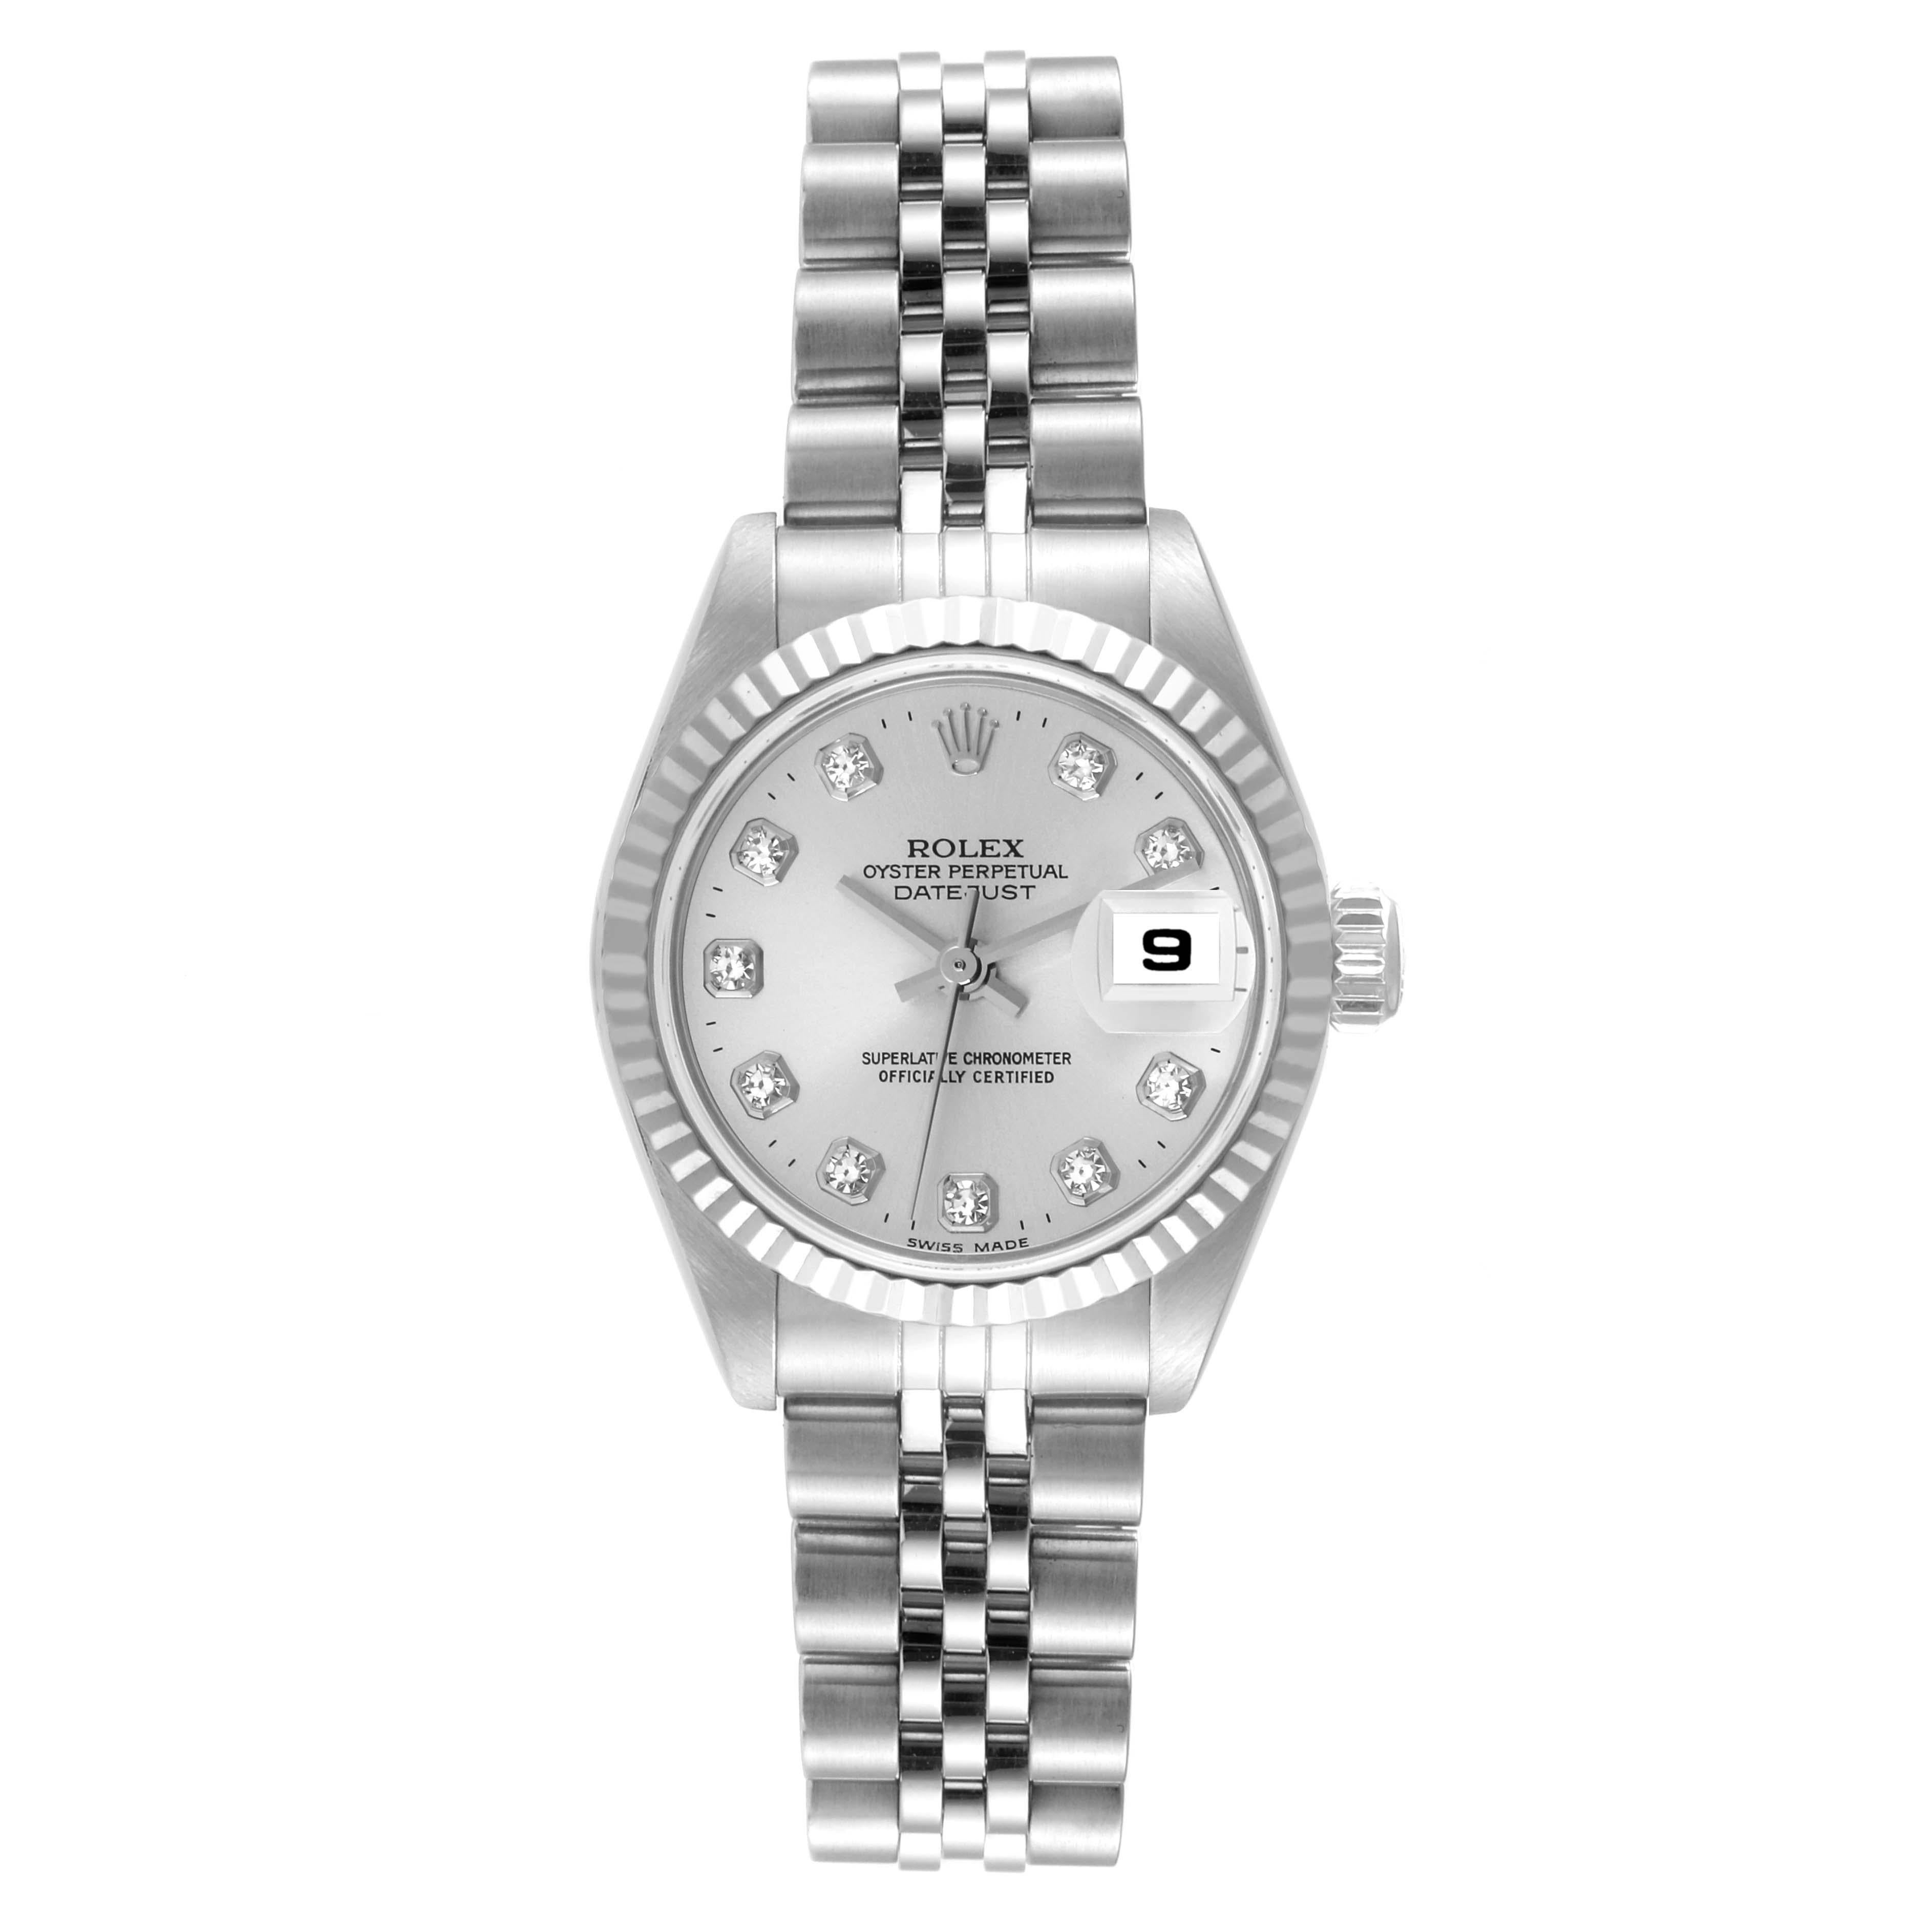 Rolex Datejust Steel White Gold Diamond Dial Ladies Watch 79174 Box Papers. Officially certified chronometer automatic self-winding movement. Stainless steel oyster case 26.0 mm in diameter. Rolex logo on a crown. 18K white gold fluted bezel.